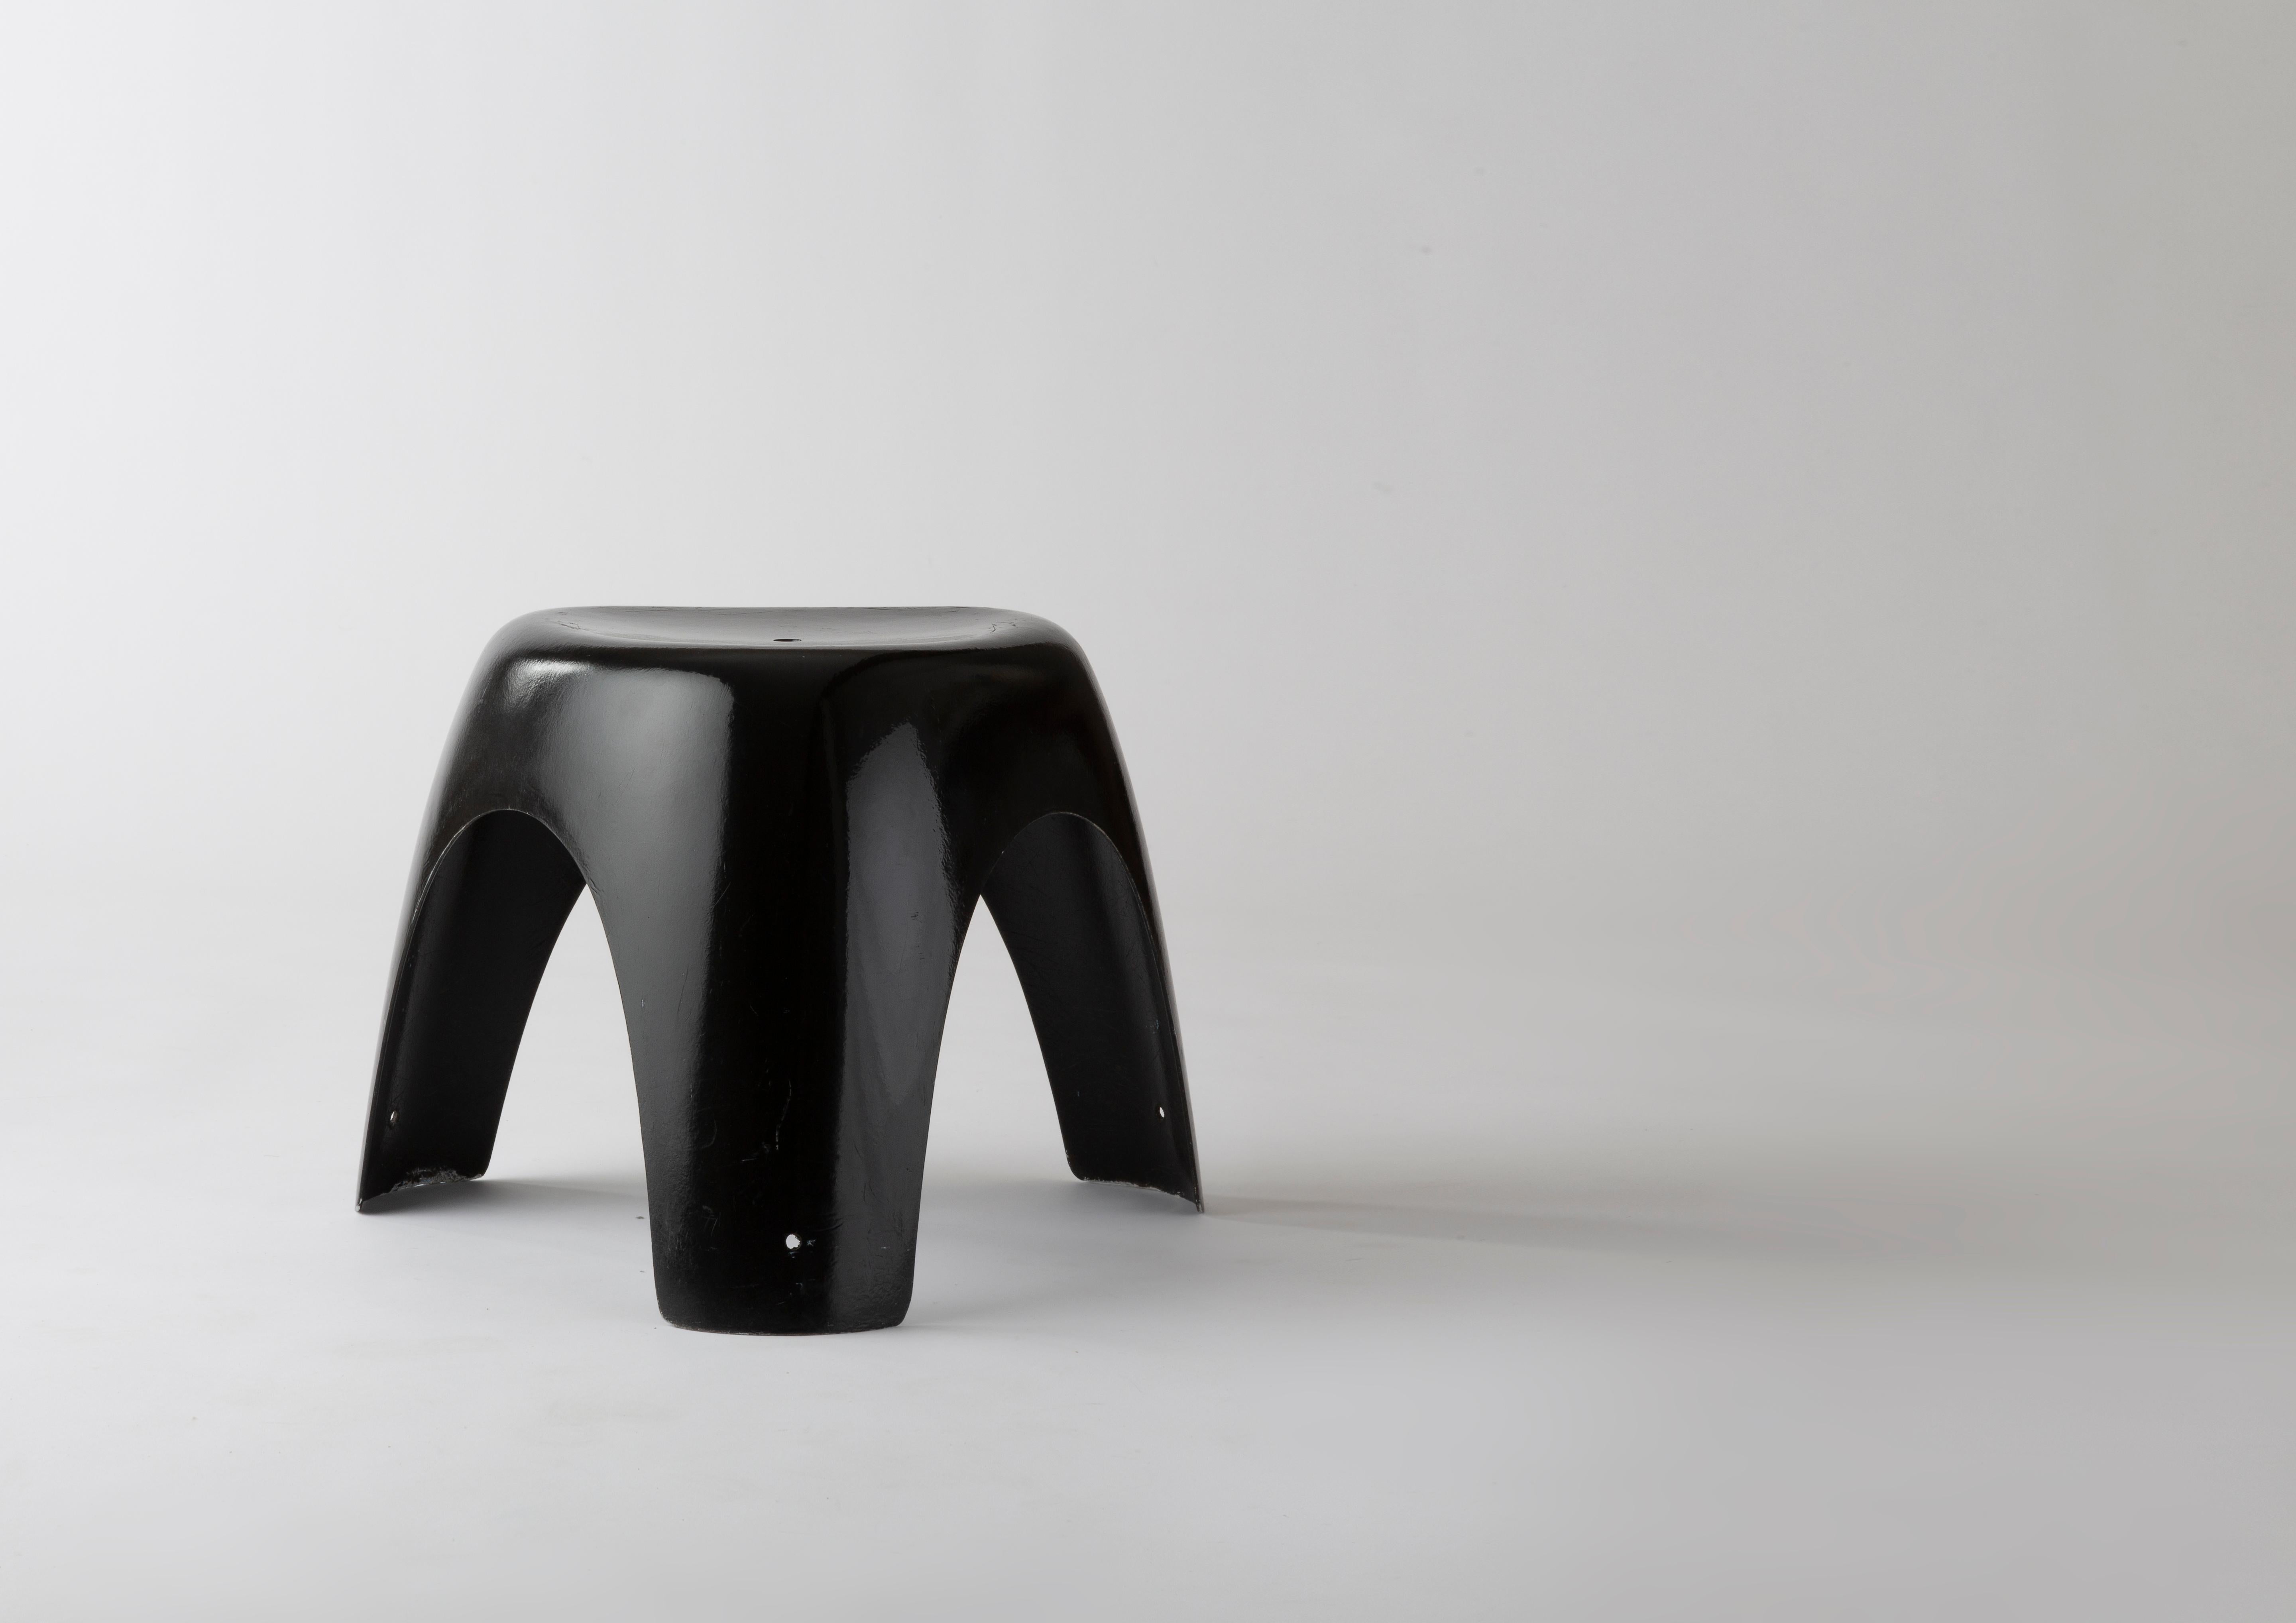 An Elephant stool by Sori Yanagi, in black fiberglass, manufactured by Kotobuki Seating Company, Tokyo, Japan, engraved with the editor’s mark and designer’s one under the seat, model designed in 1954.